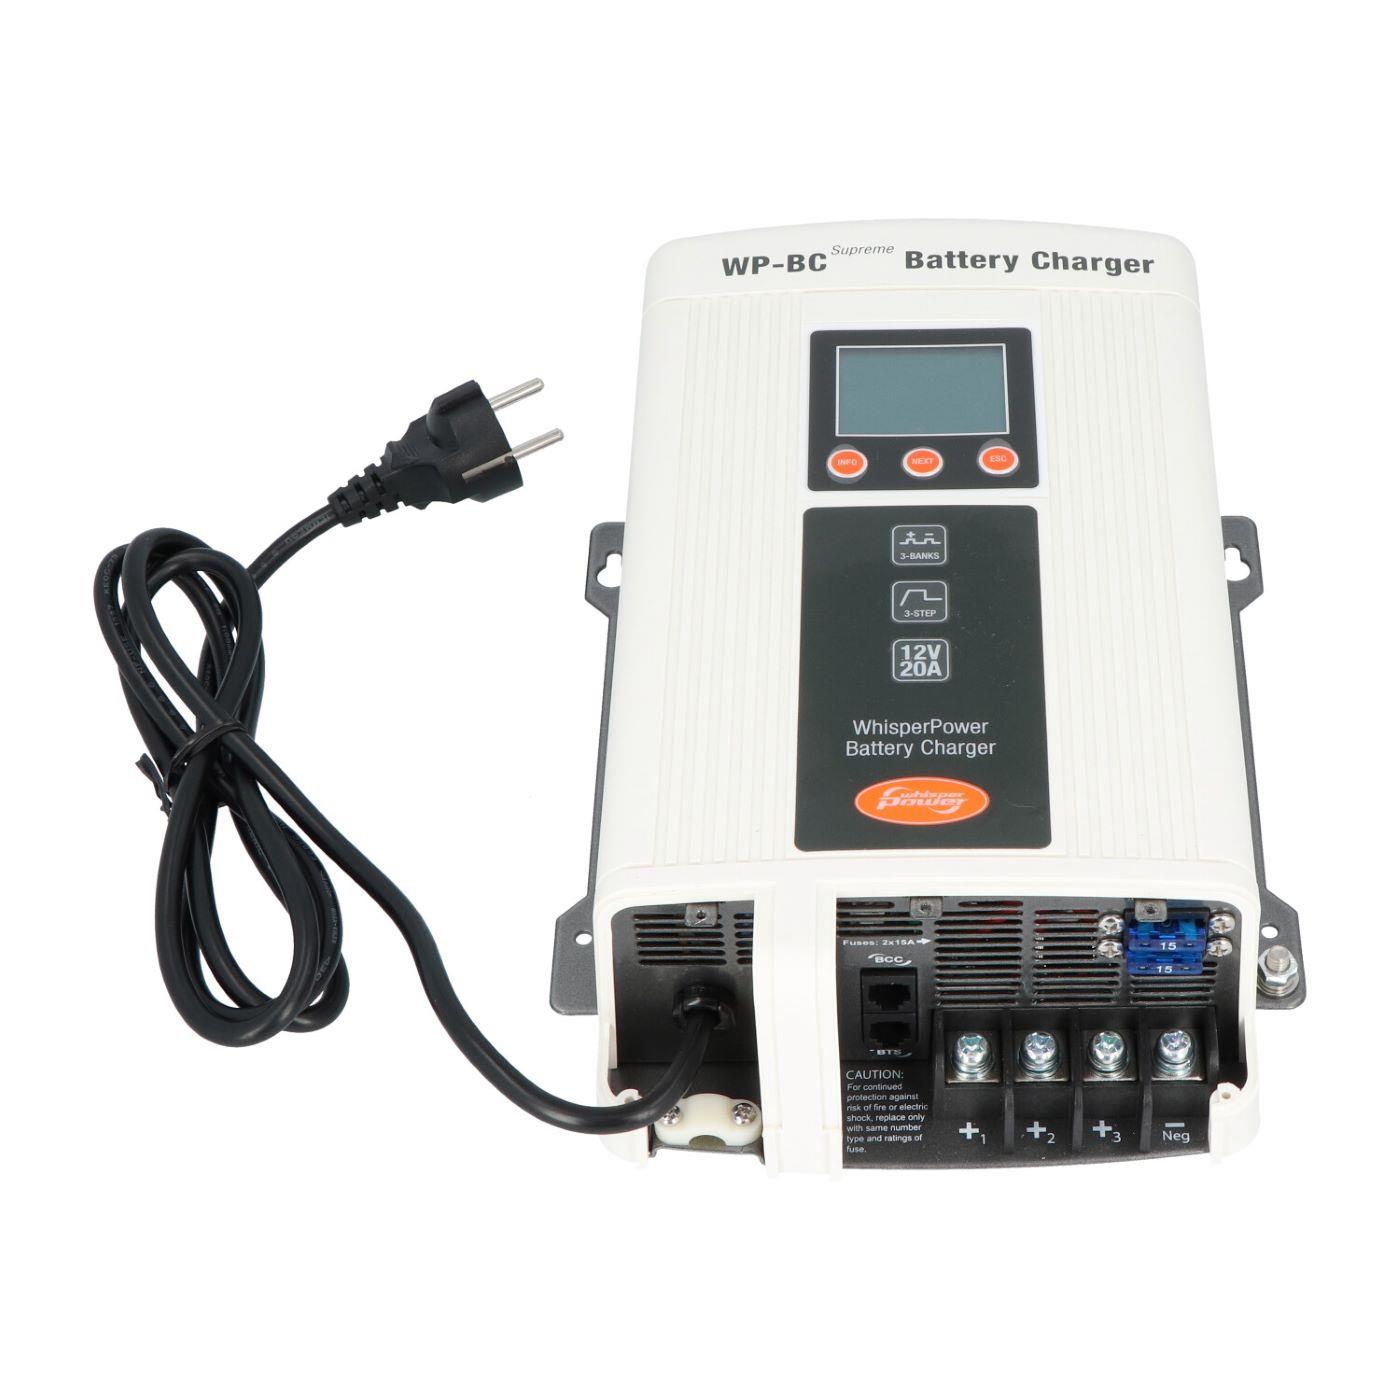 WhisperPower BC Supreme Serie Battery charger 12V / 20A - 3x output